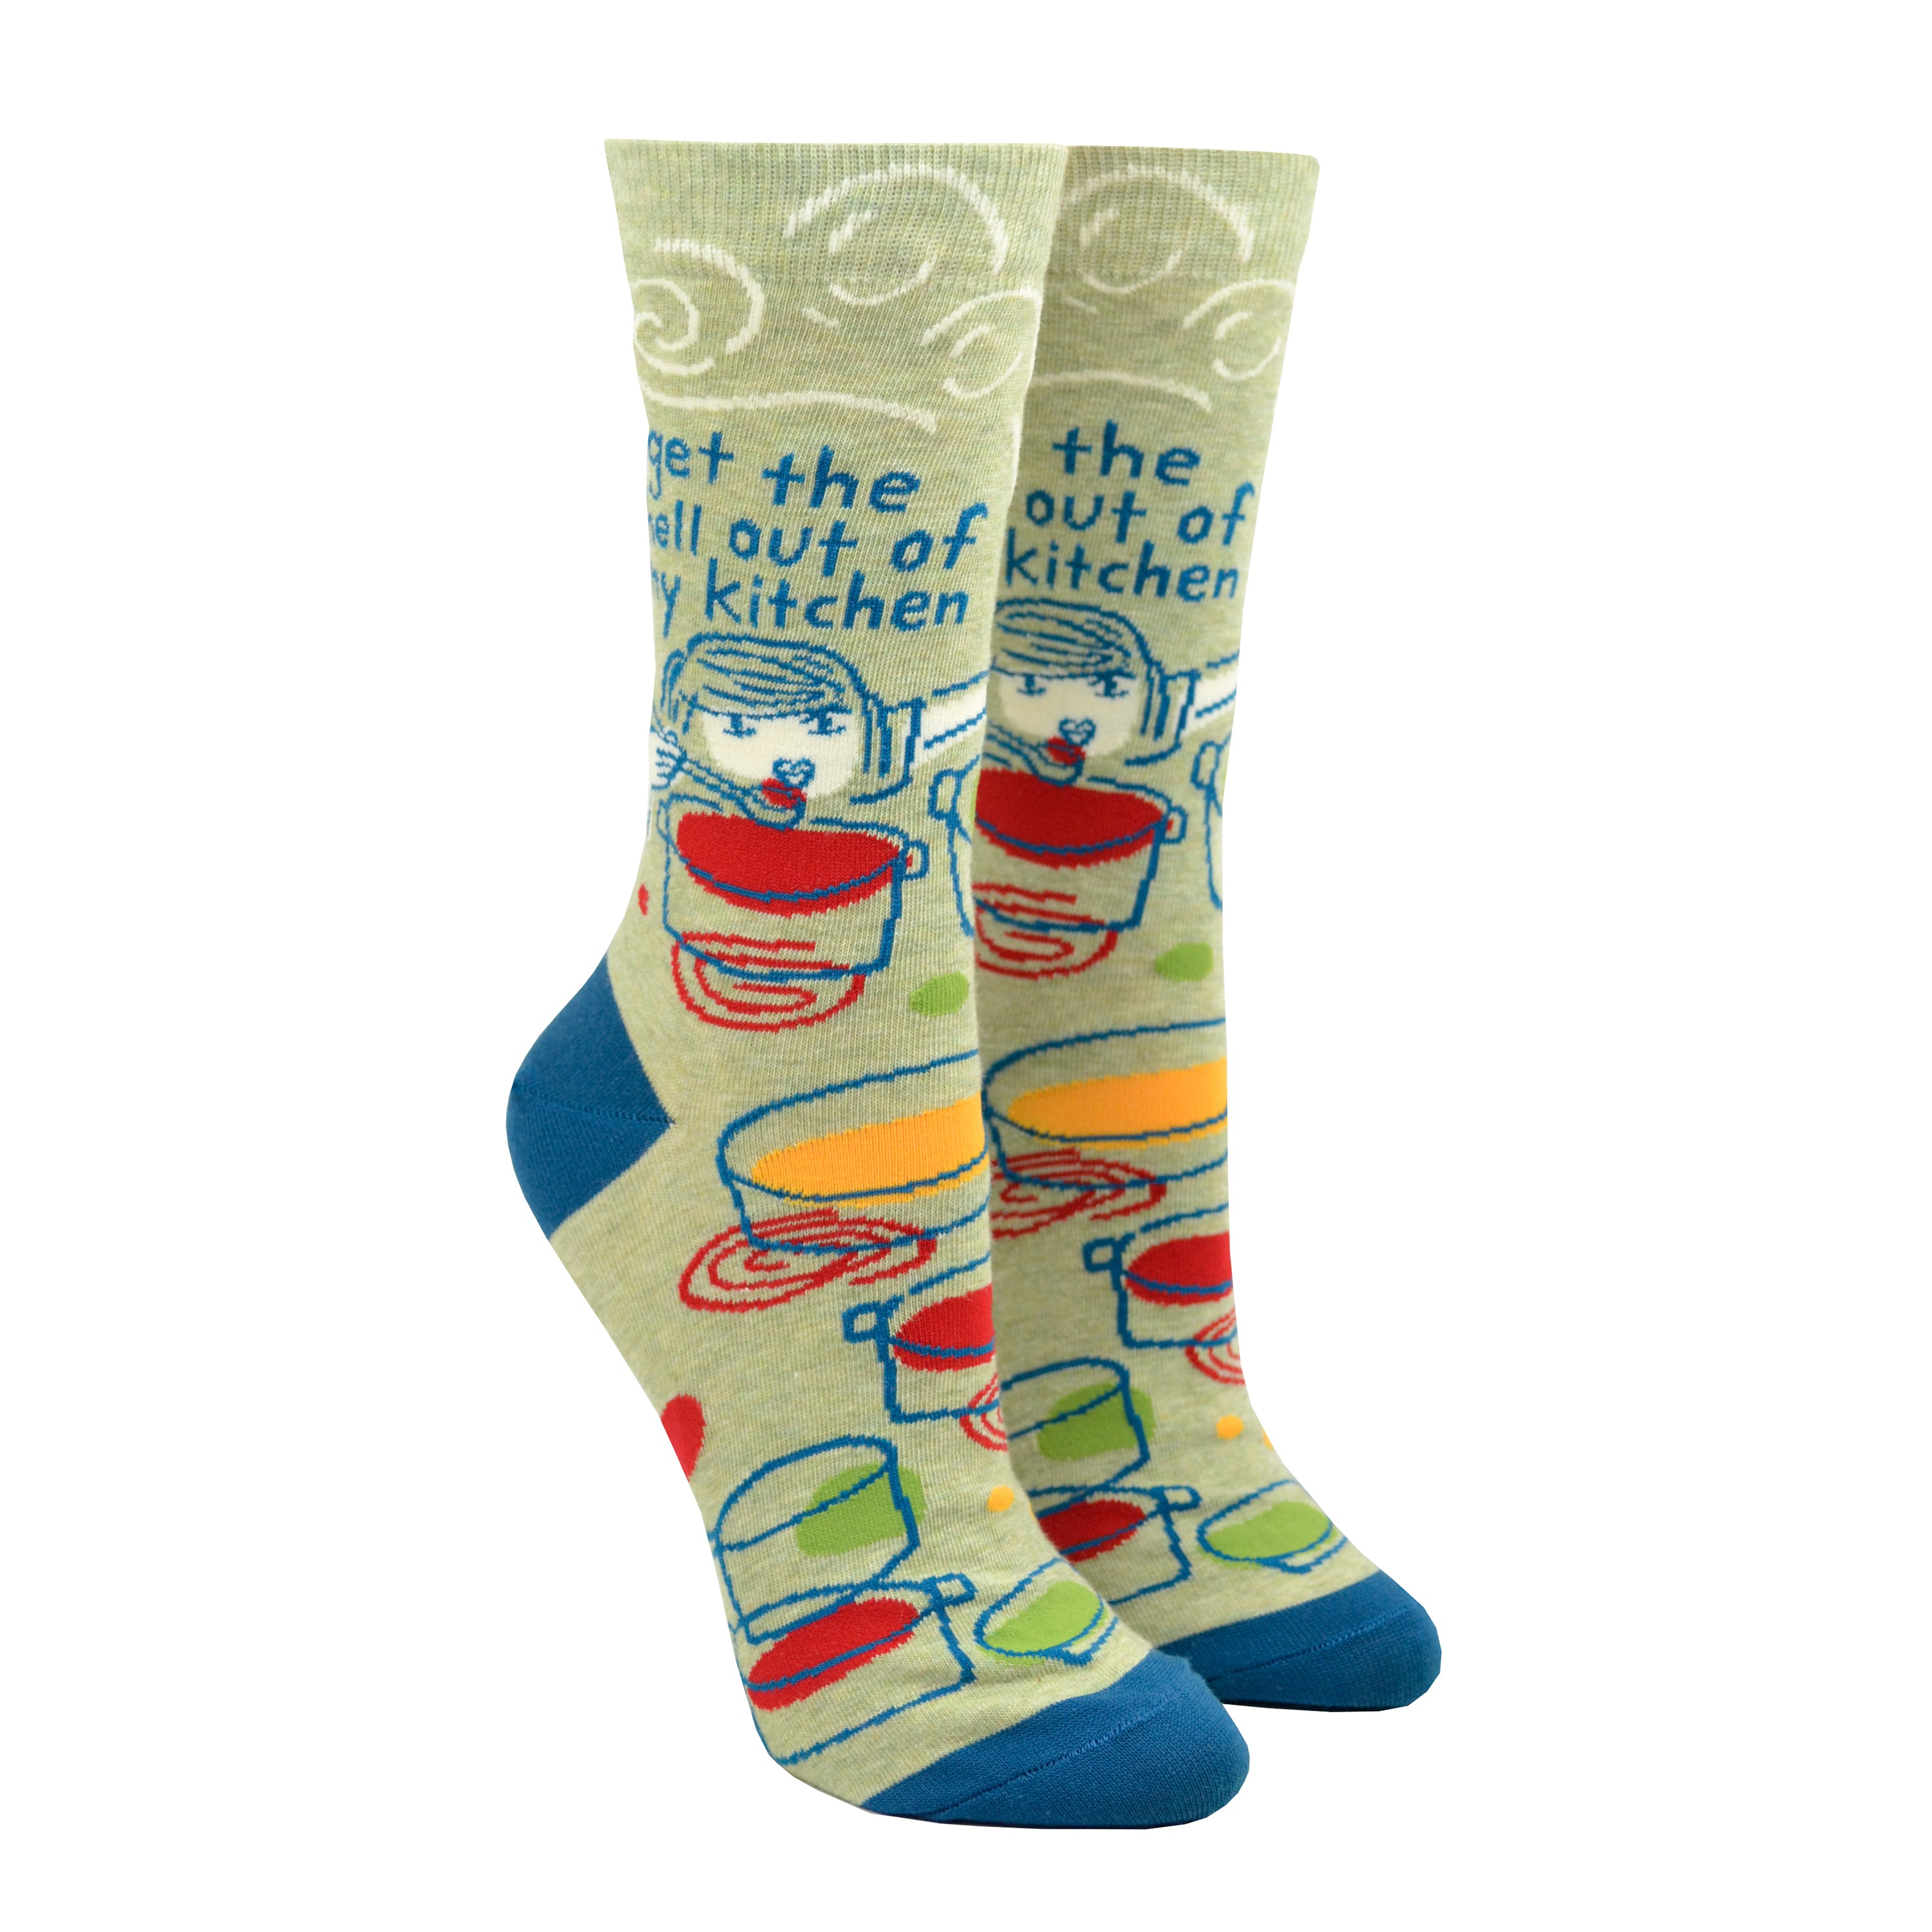 Shown on leg forms, a pair of women's Blue Q cotton crew socks in olive green with a blue heel and toe. These socks feature a cartoon women over a pot with a spoon and the phrase, 